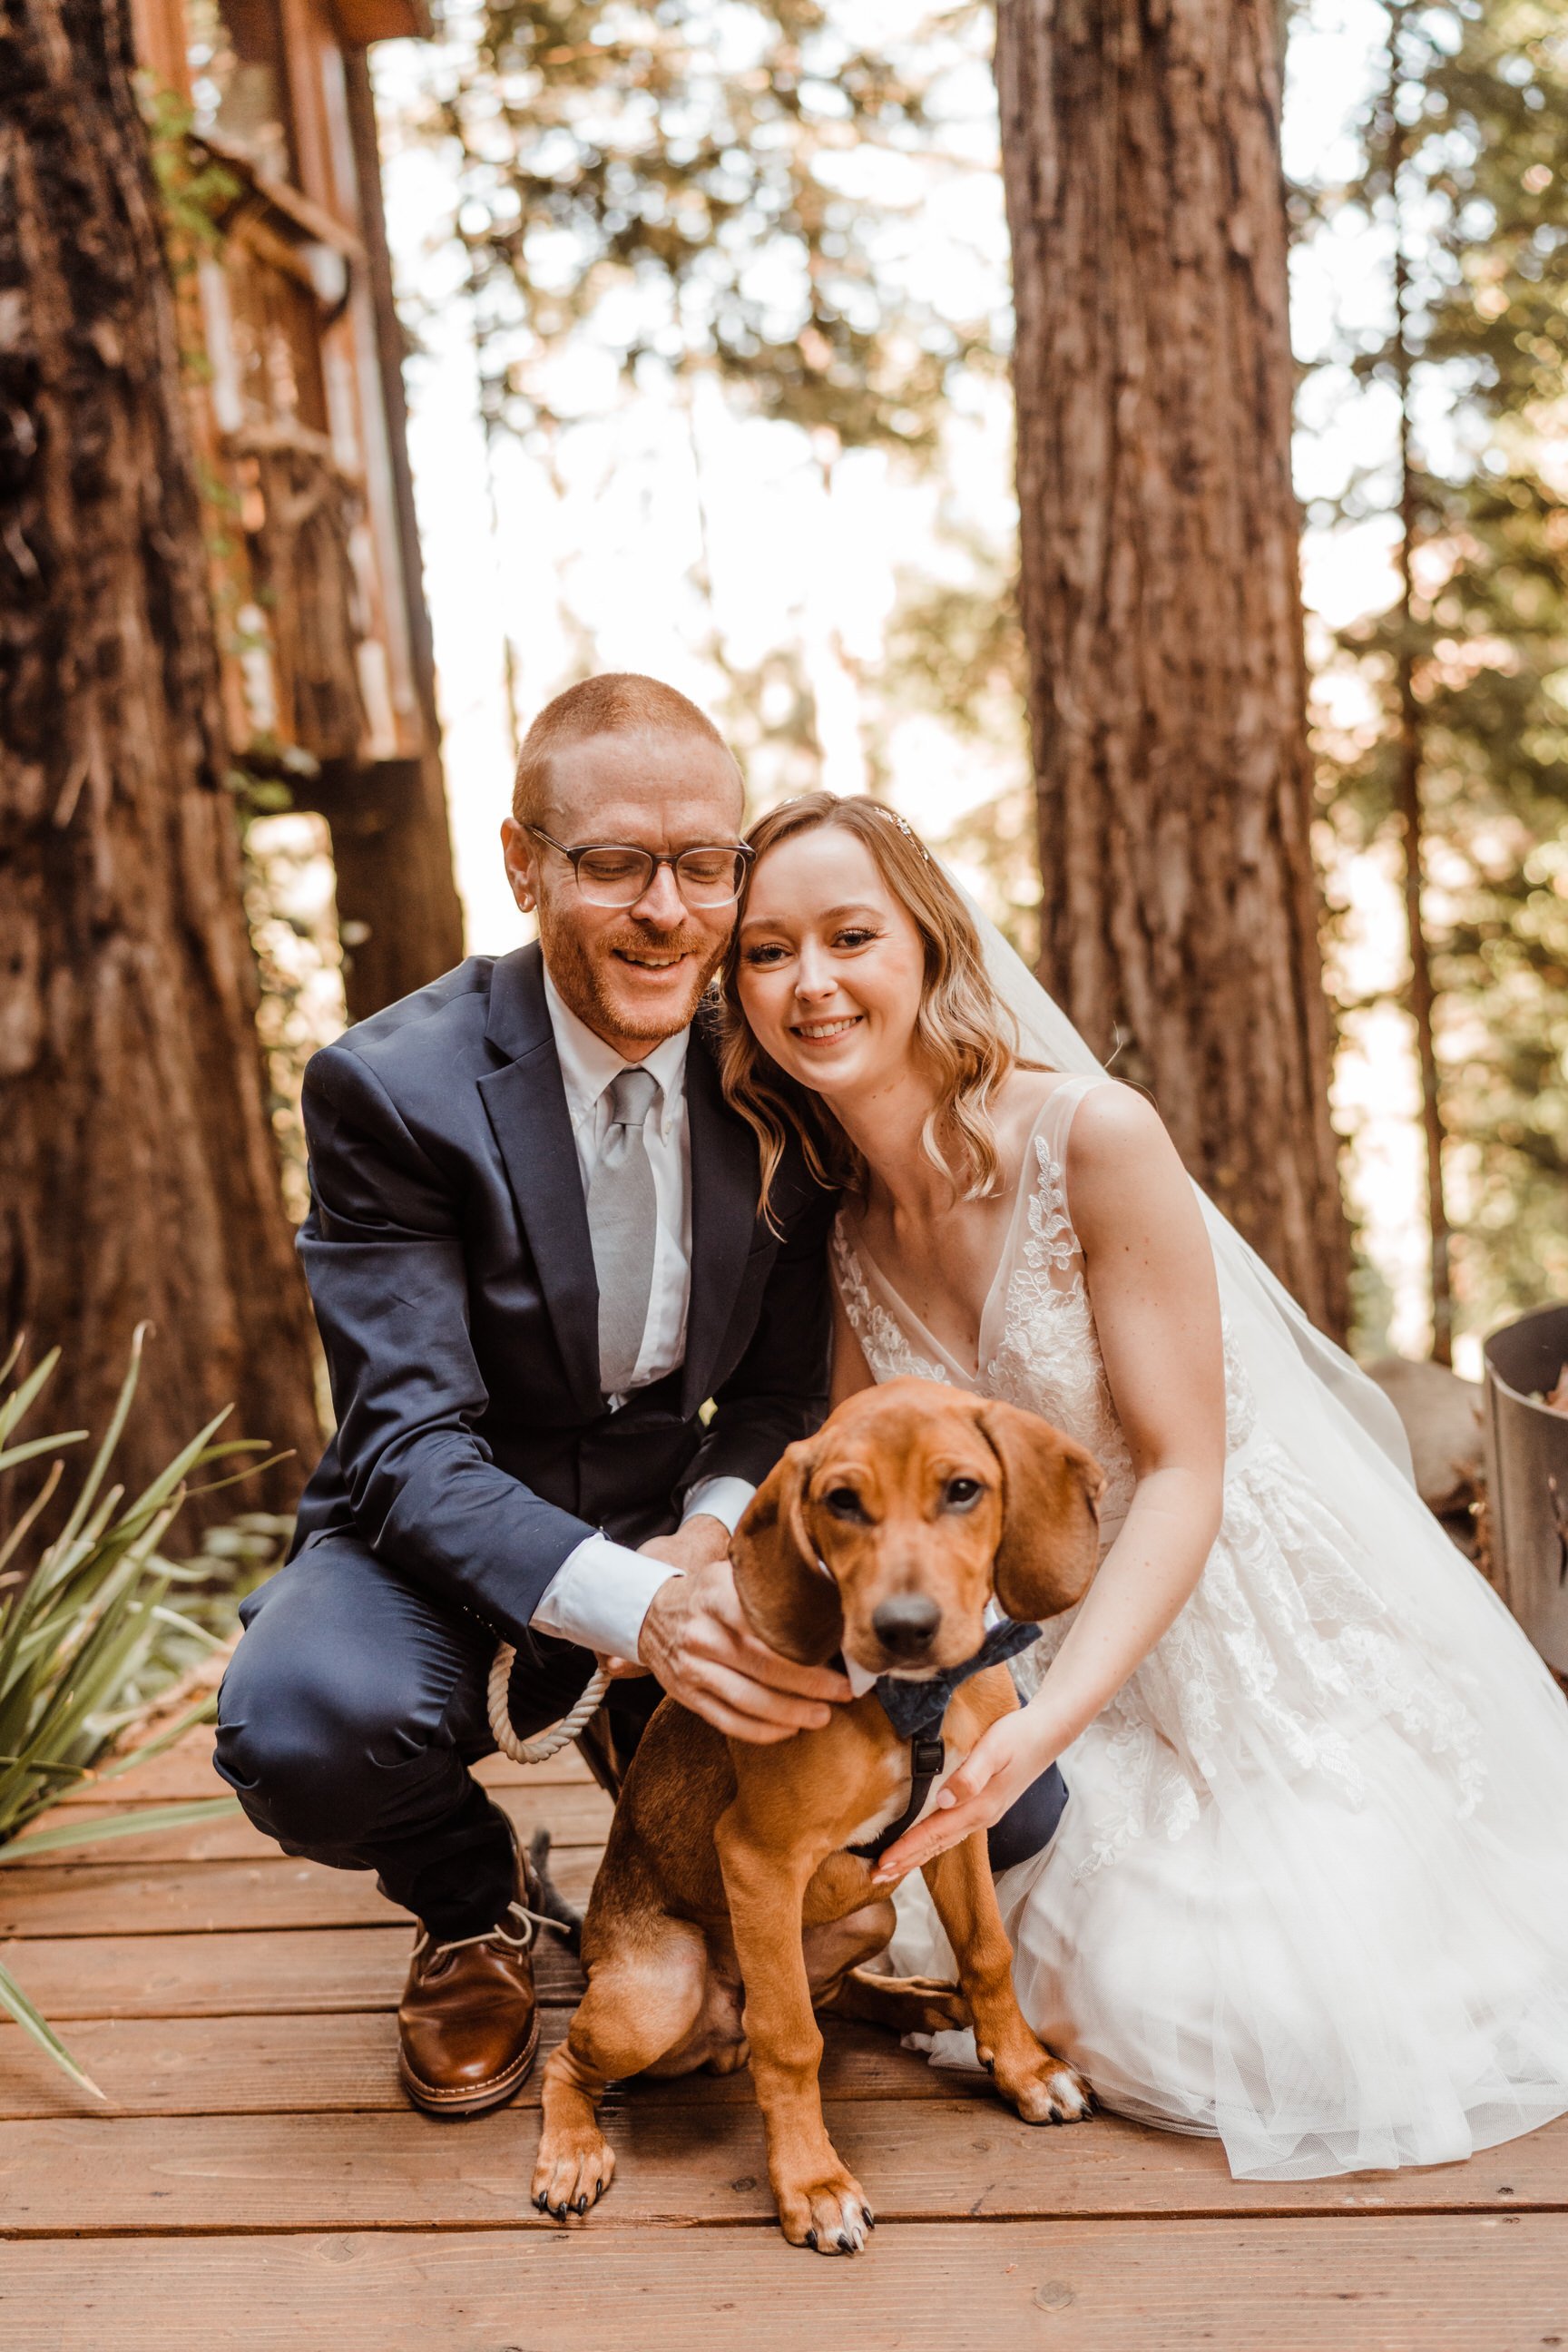 Wedding-in-the-Woods-Bride-and-Groom-Holding-Rescue-Puppy-at-Elopement-beneath-Redwood-Trees (3).jpg